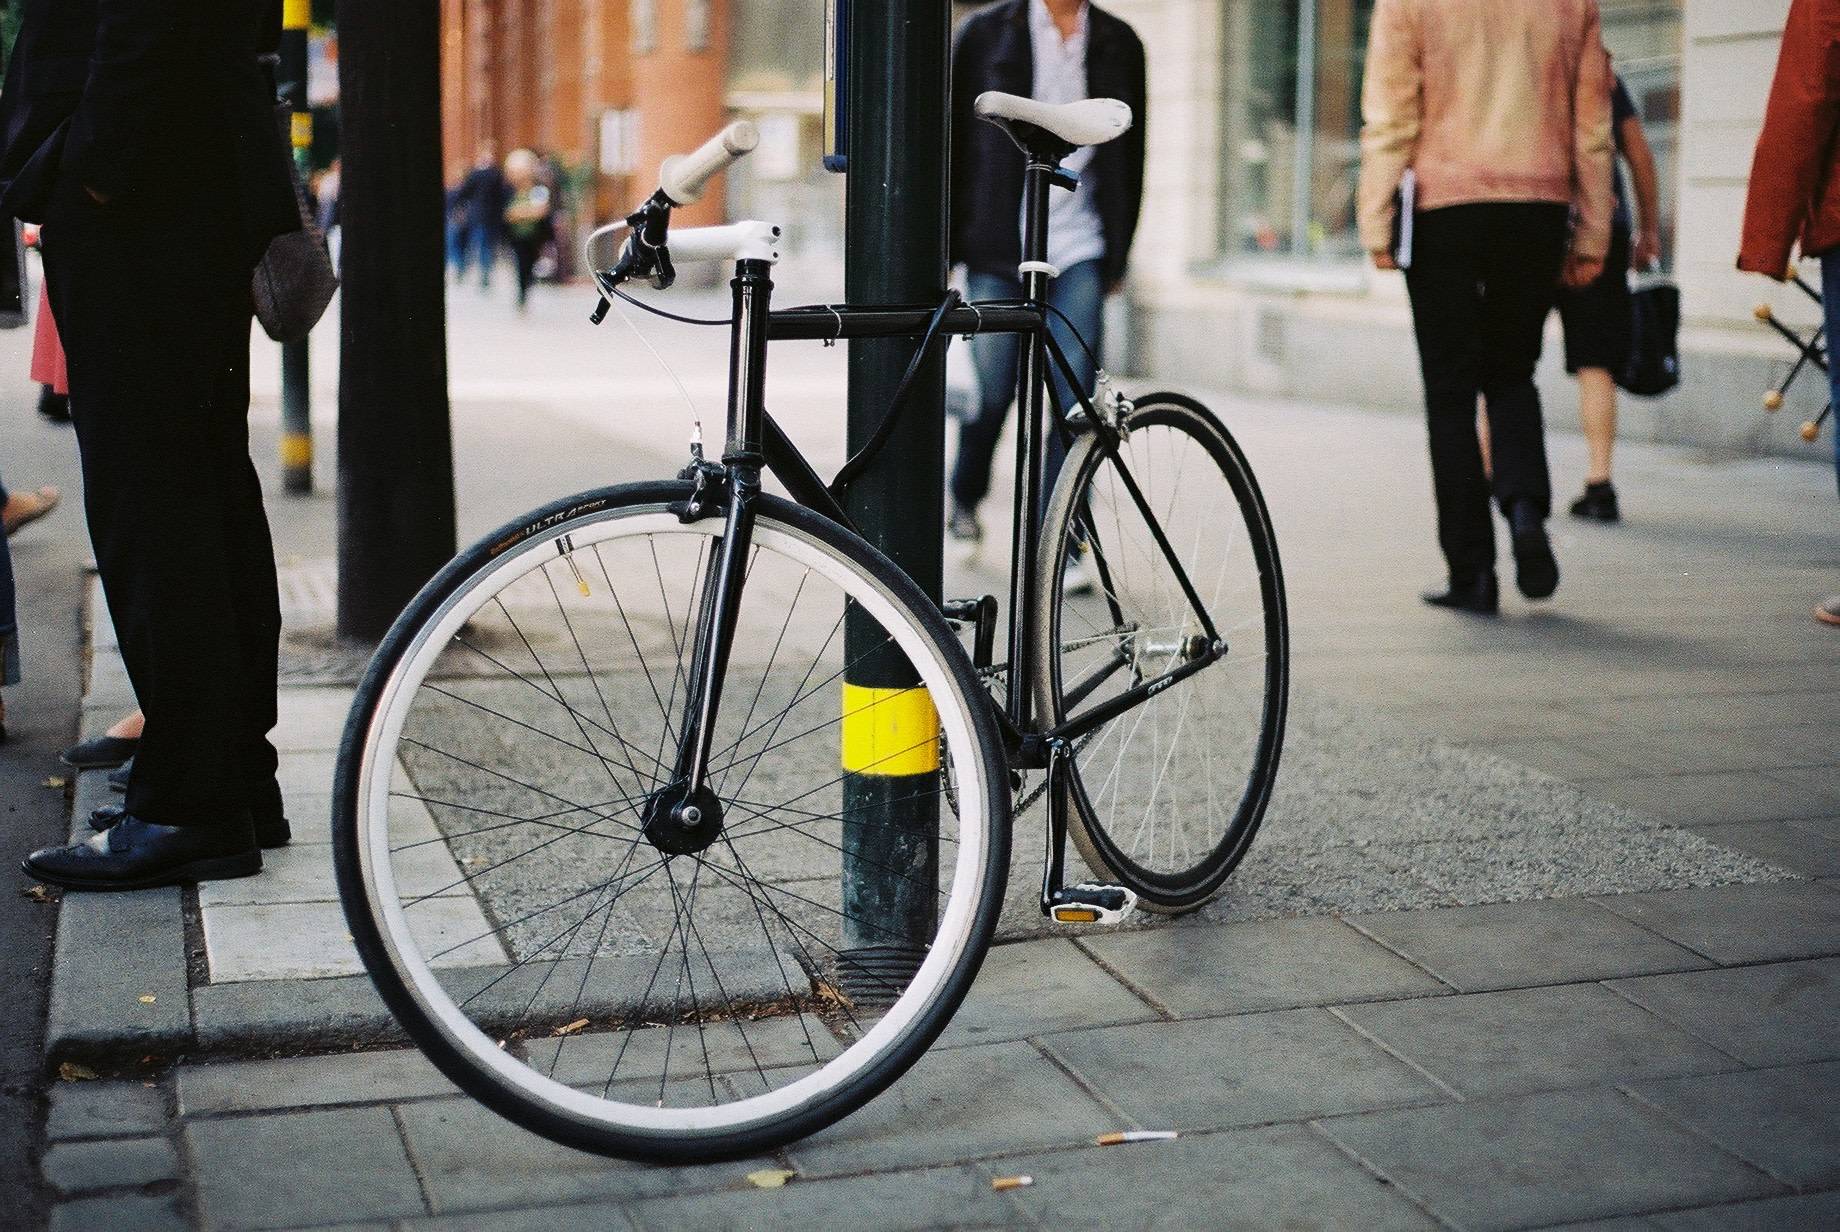 a blank and white single speed bicycle locked to the street post, several people walking on the sidewalk behind